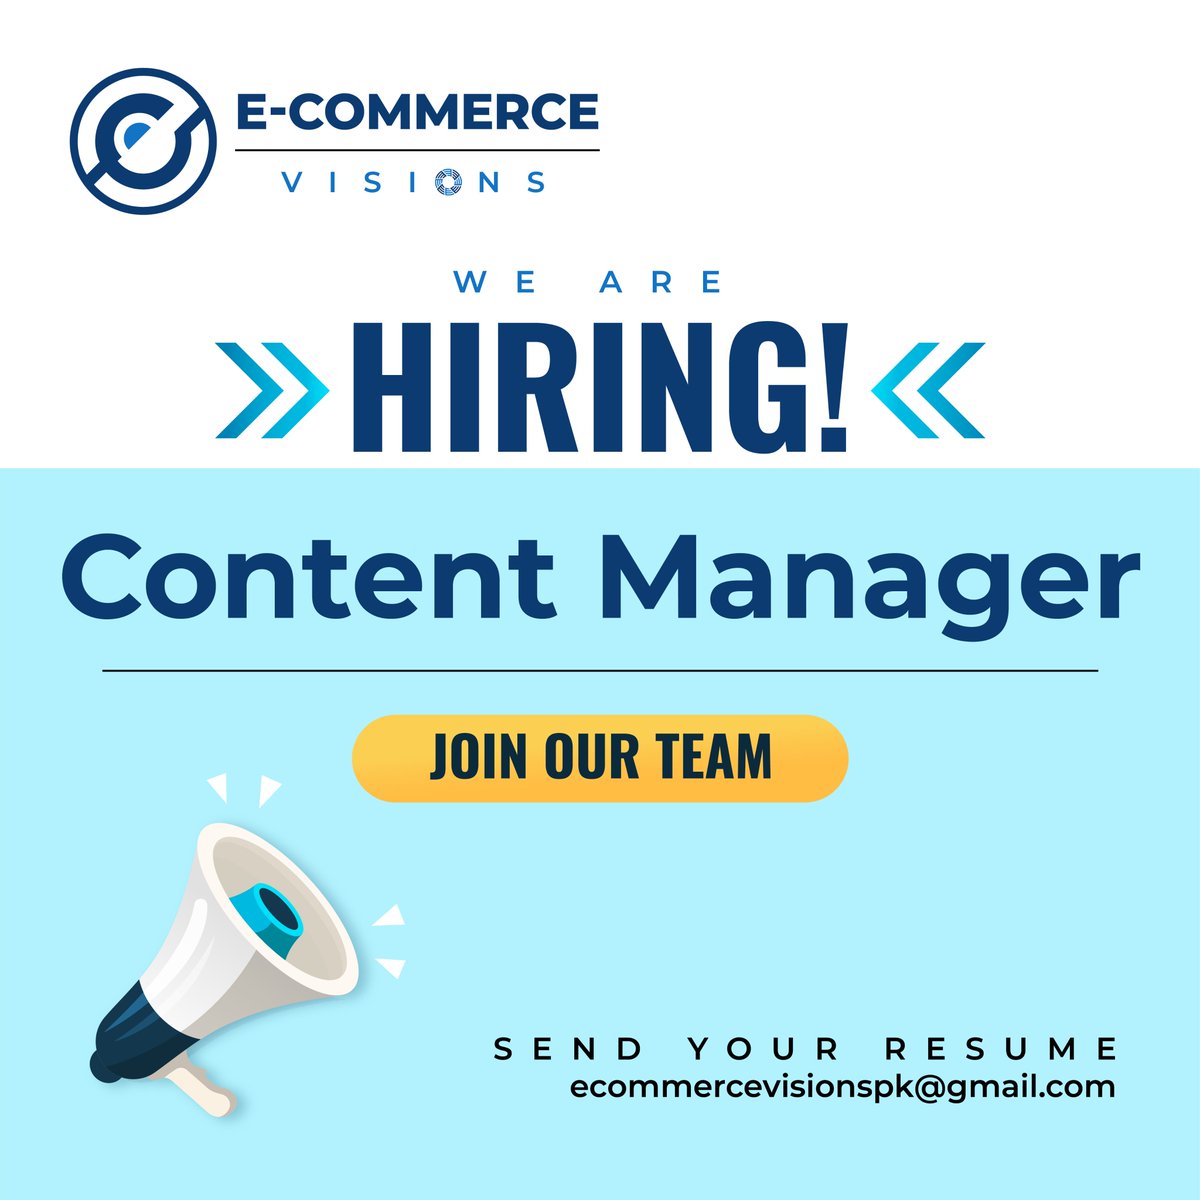 Join Our Team at Ecommerce Visions!

Location: Plan 9 Incubation Center, University of the Punjab Gujranwala Campus

Apply now and let's make waves together.
.
.
.
.
#EcommerceVisions #ContentManager #ContentCreation #DigitalContent #Hiring #Gujranwala